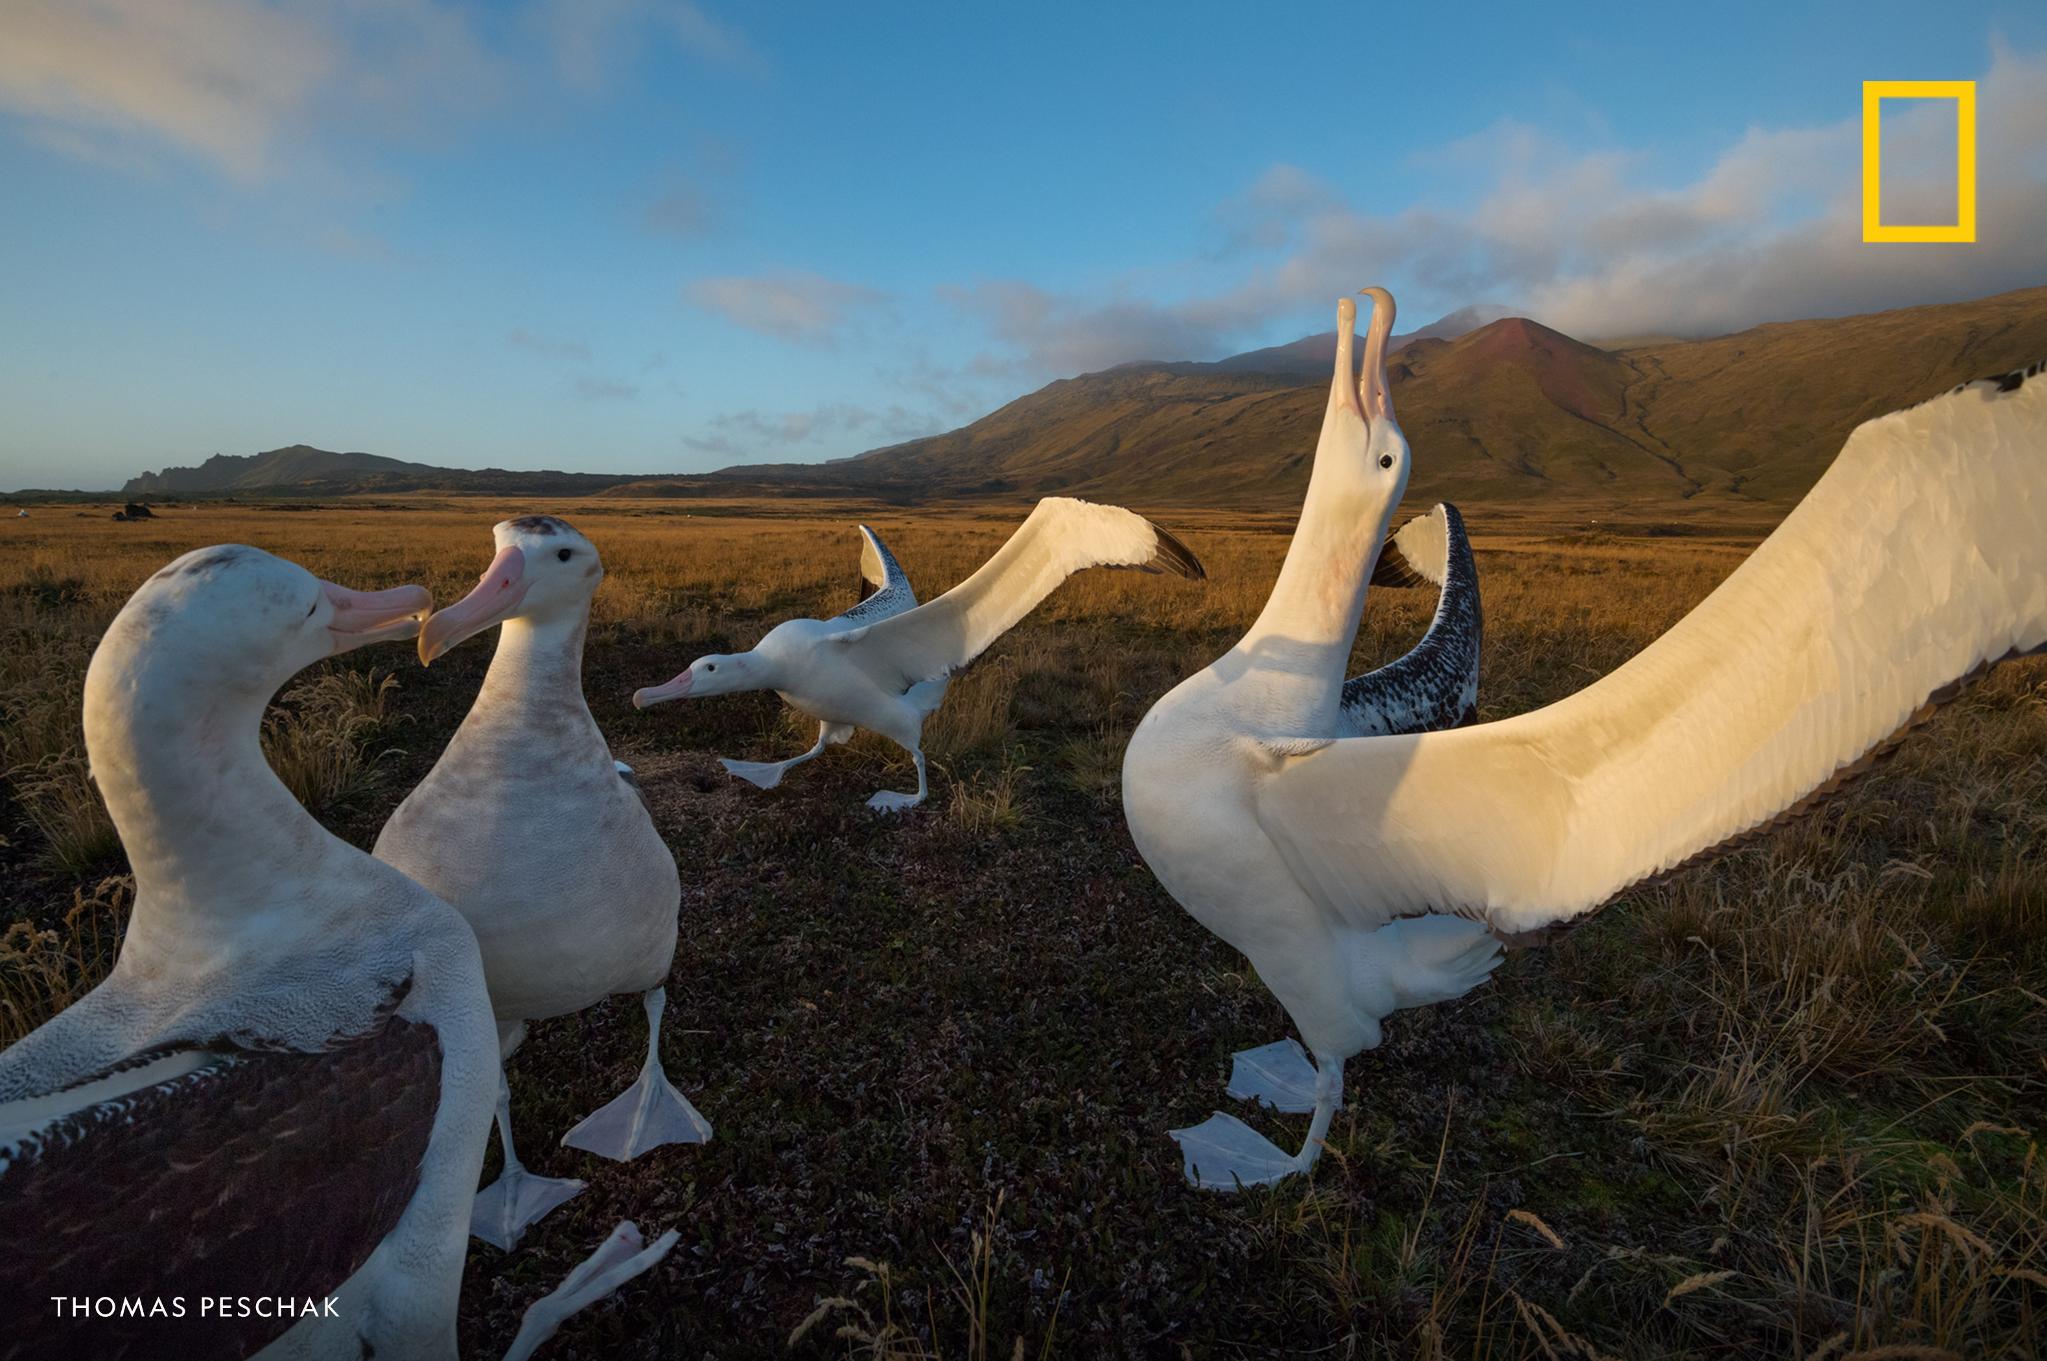 Tiny mice are feasting on the heads of live albatross chicks on a sub-antarctic island. Why? Find out in the latest episode of "Overheard." https://on.natgeo.com/32kI2hd